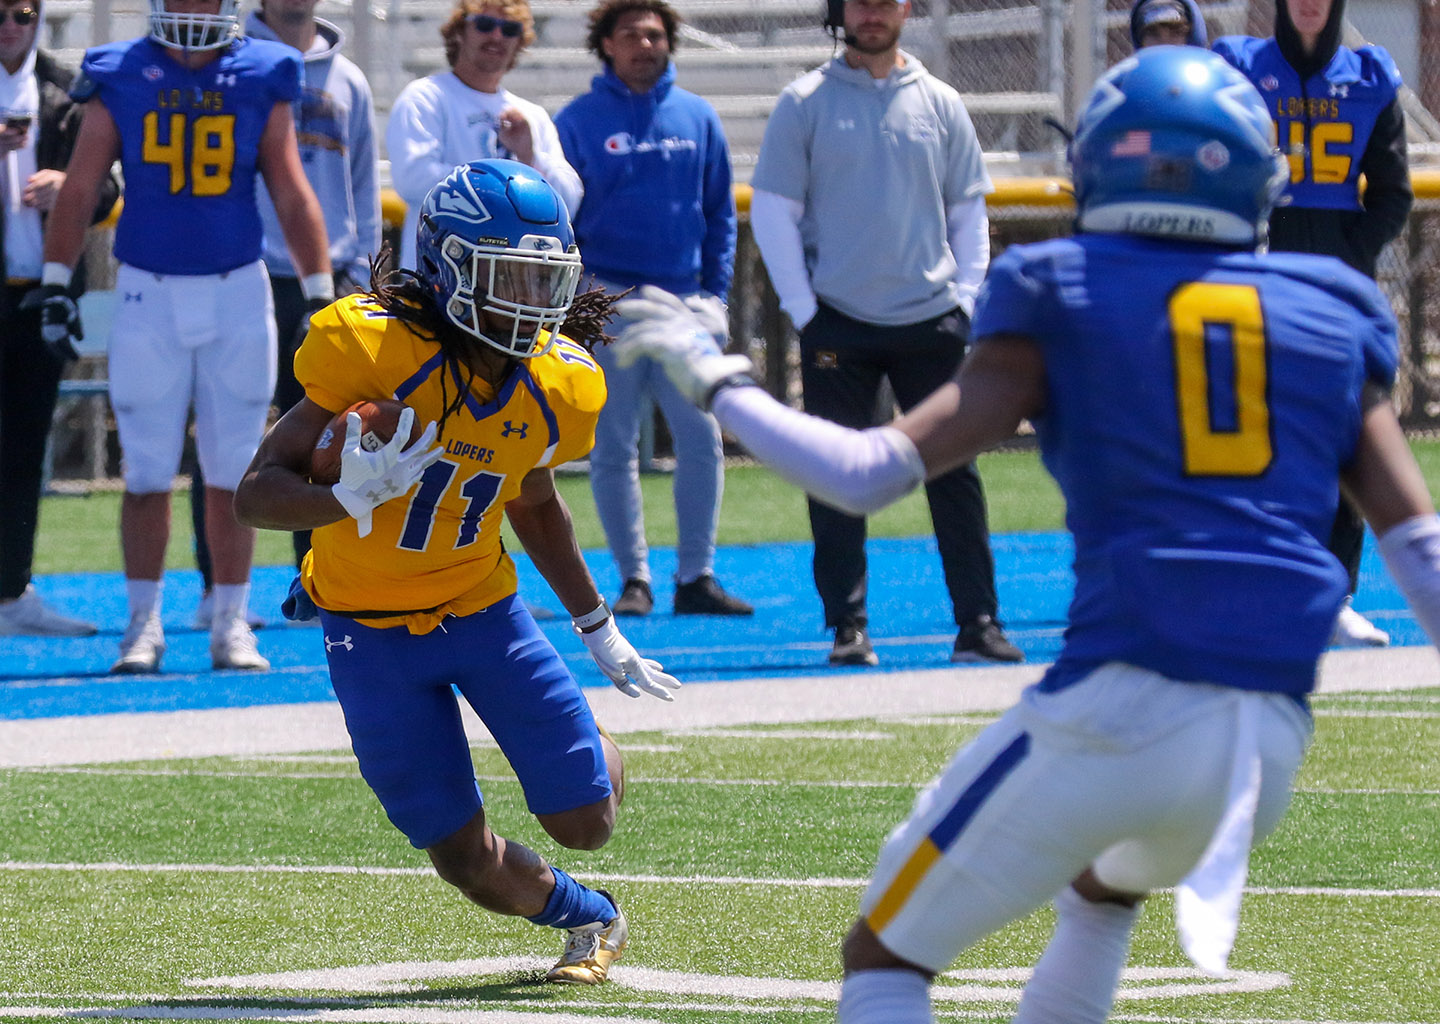 The UNK football spring game is scheduled for 6 p.m. April 19 at Cope Stadium. Community members are invited to a family-friendly tailgate starting at 4:30 p.m., with the event supporting Kearney Police Department and its Operation NETS program. (UNK Communications)